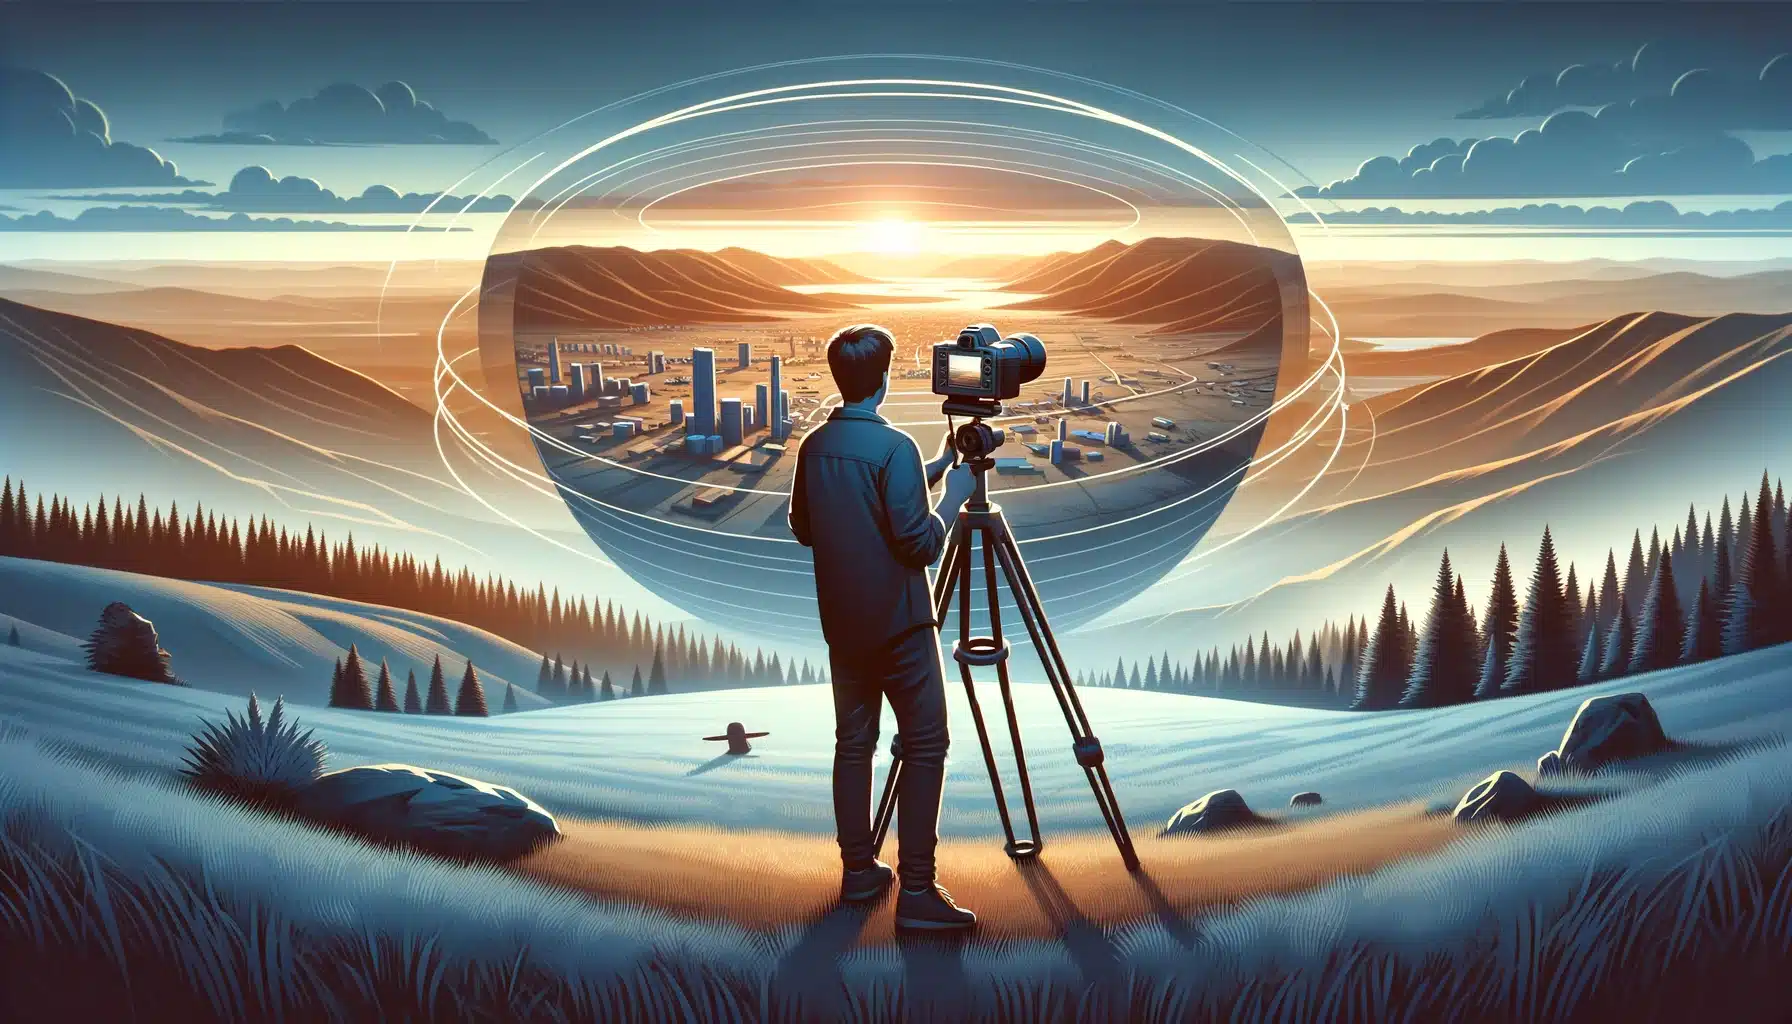 A photographer harnesses the power of cycloidal- technology to capture the expansive beauty of the surrounding landscape, fabricating immersive panoramic snapshot.